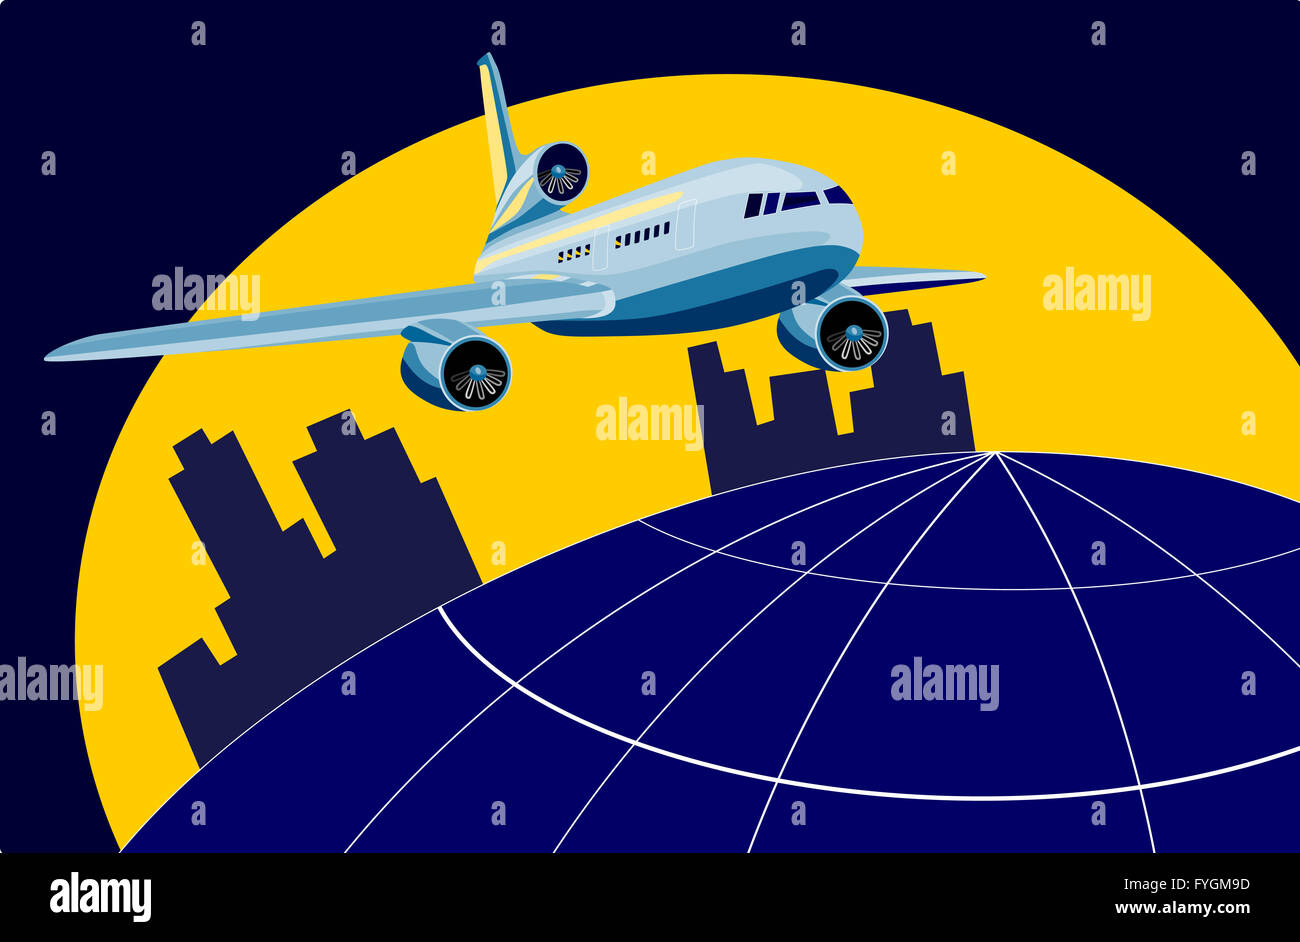 commercial jet plane airliner Stock Photo